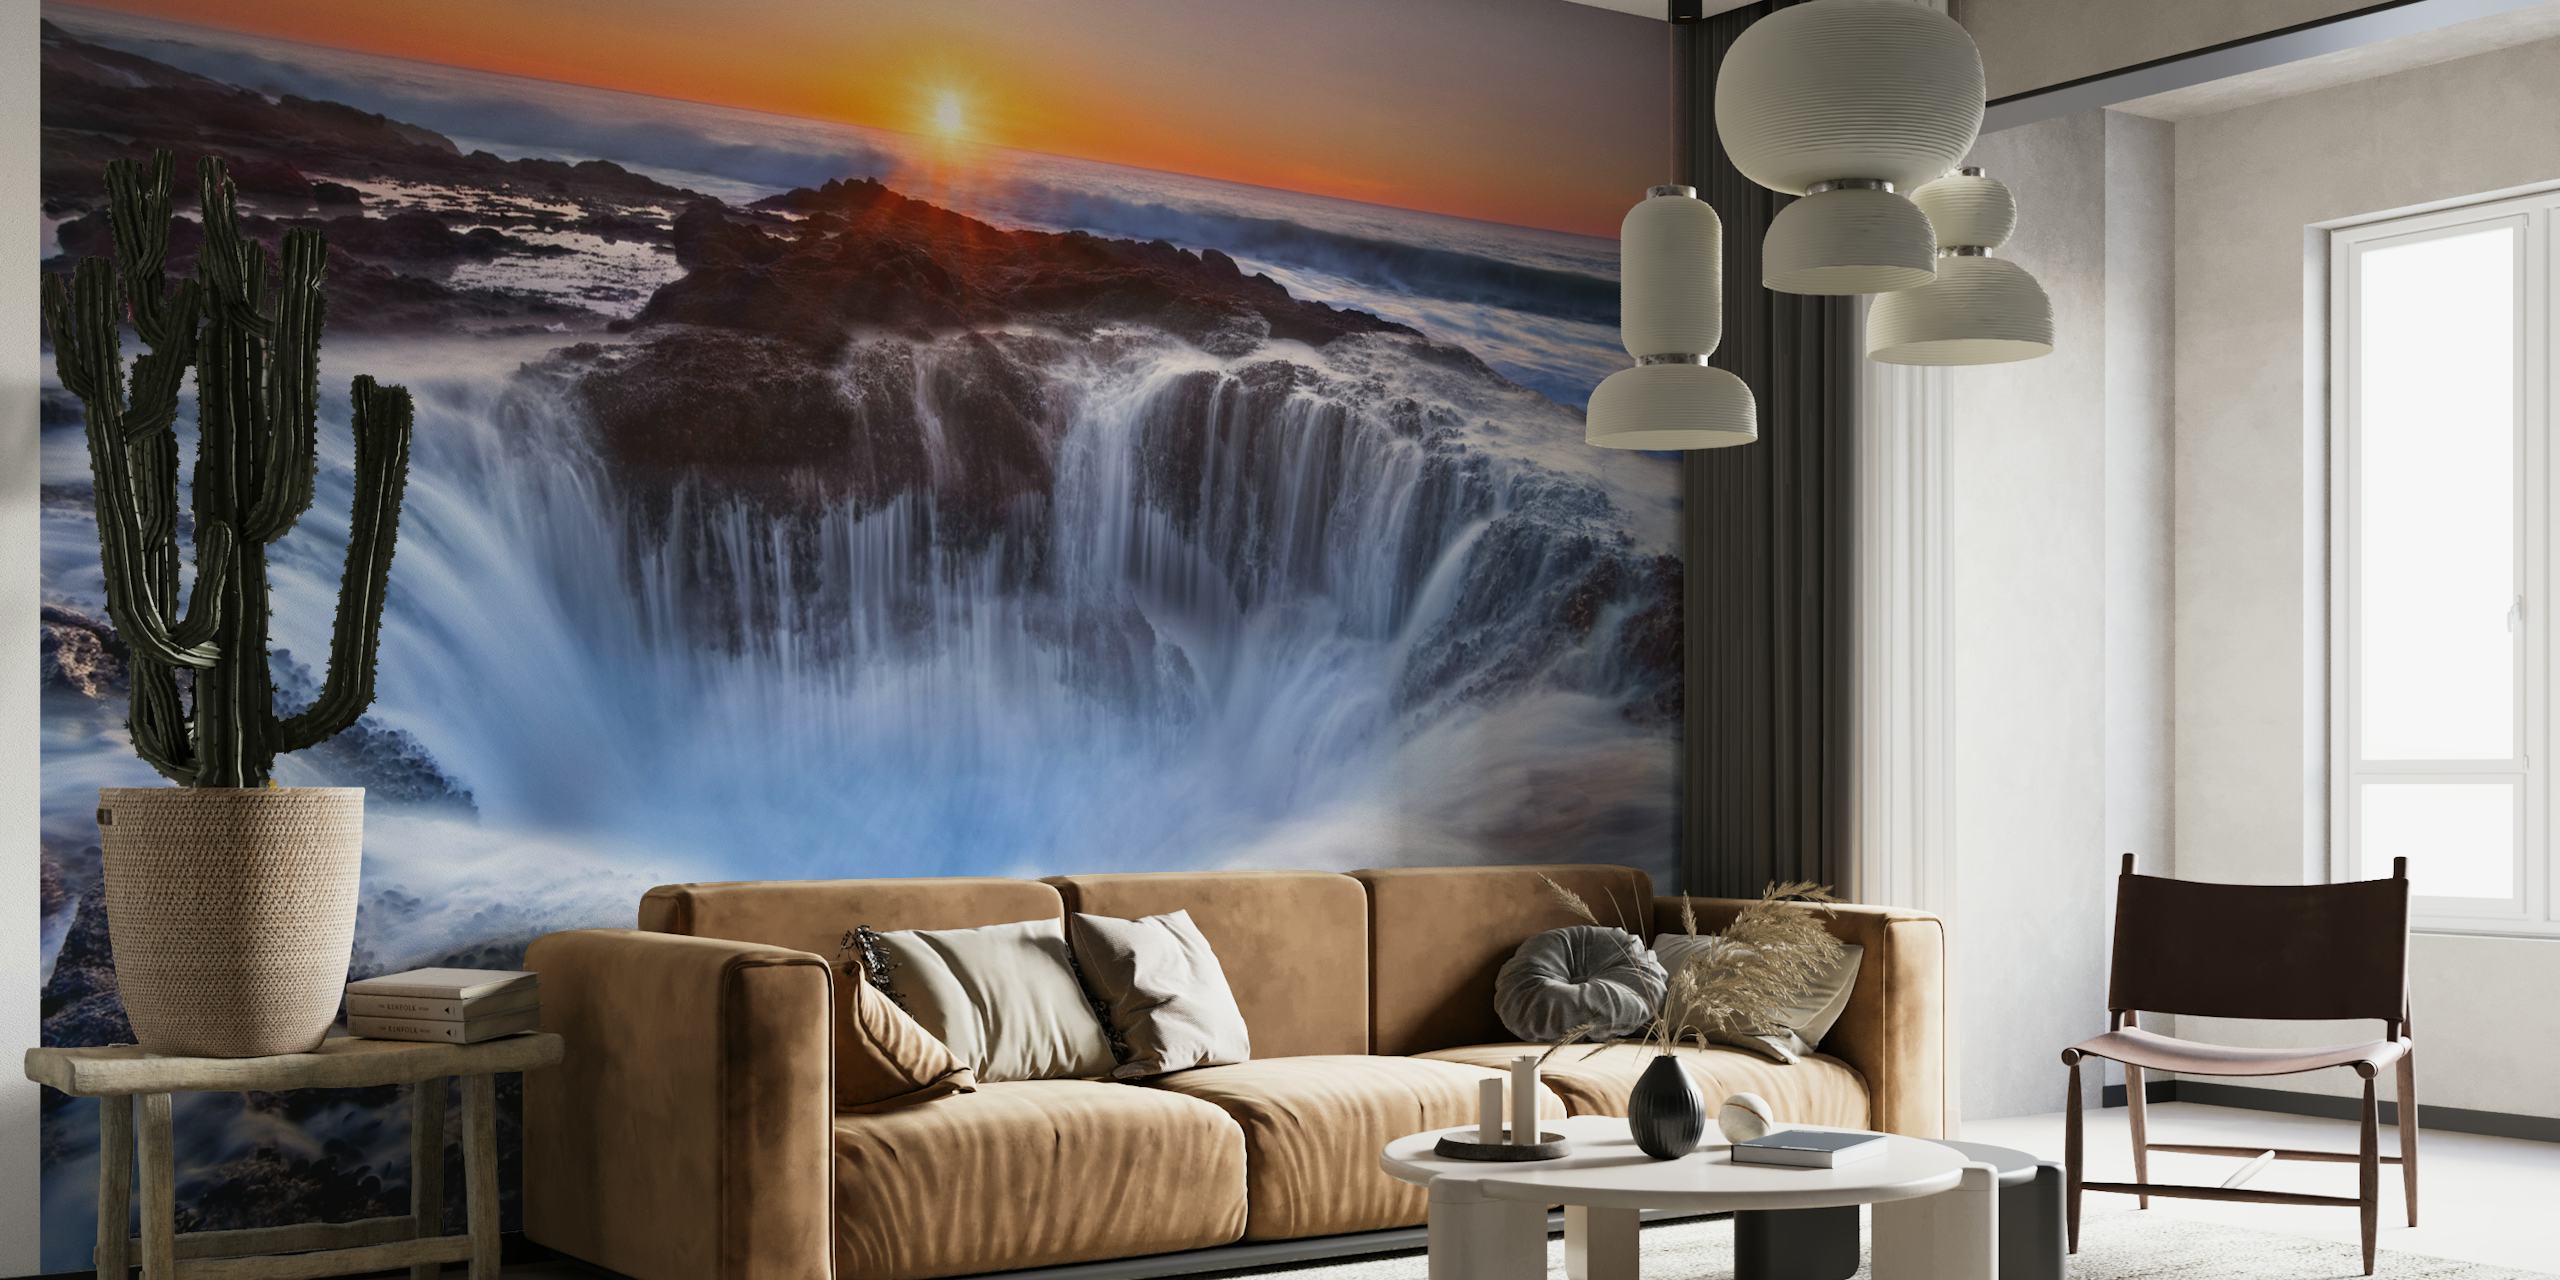 Thor's Well wall mural with sunset colors